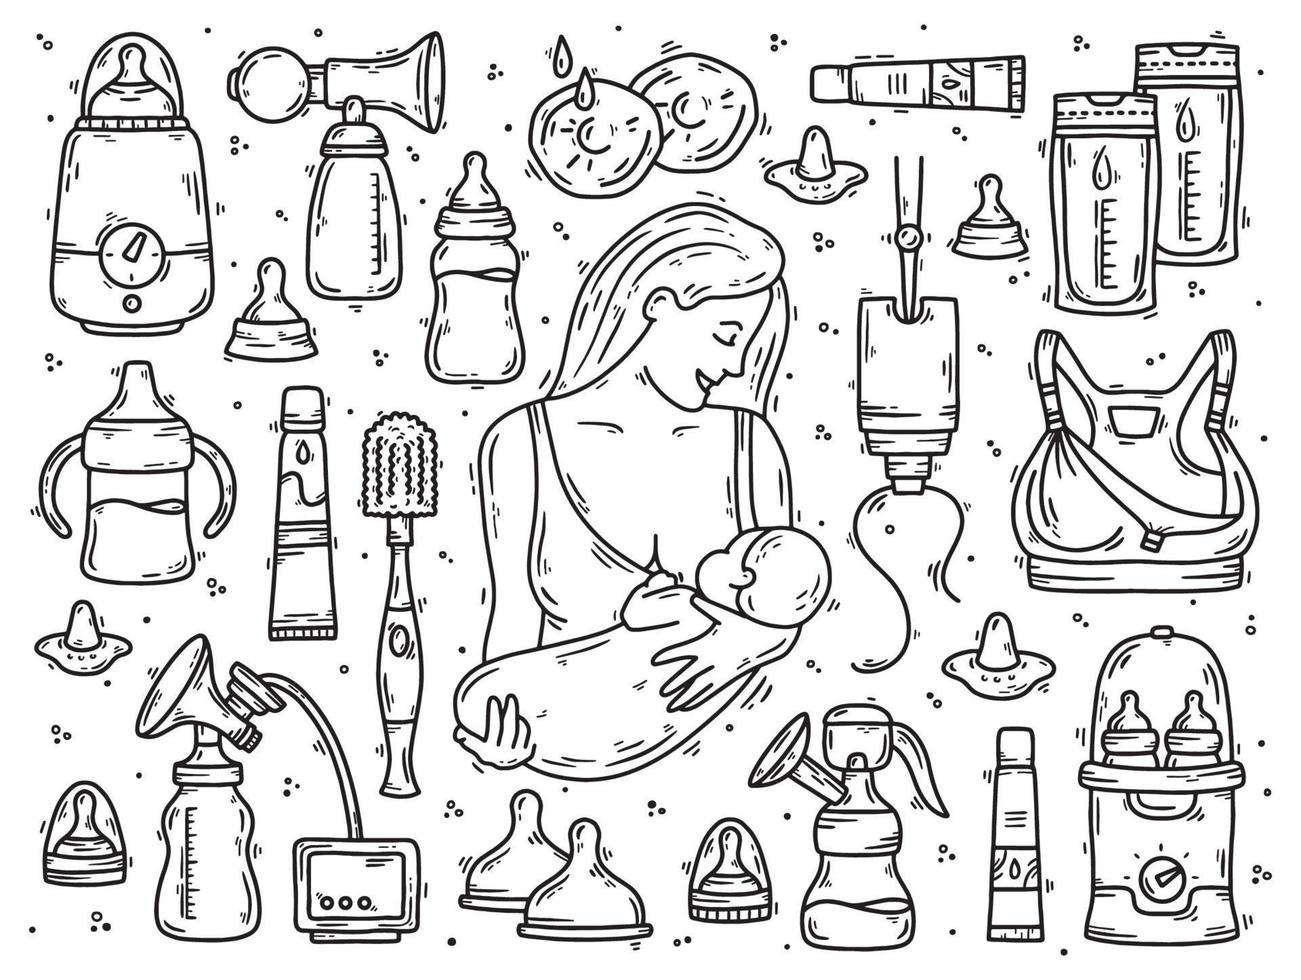 Breastfeeding and lactation of a woman with a baby, a set of vector doodle sketch icons. Devices for the nursing and nutrition with milk.